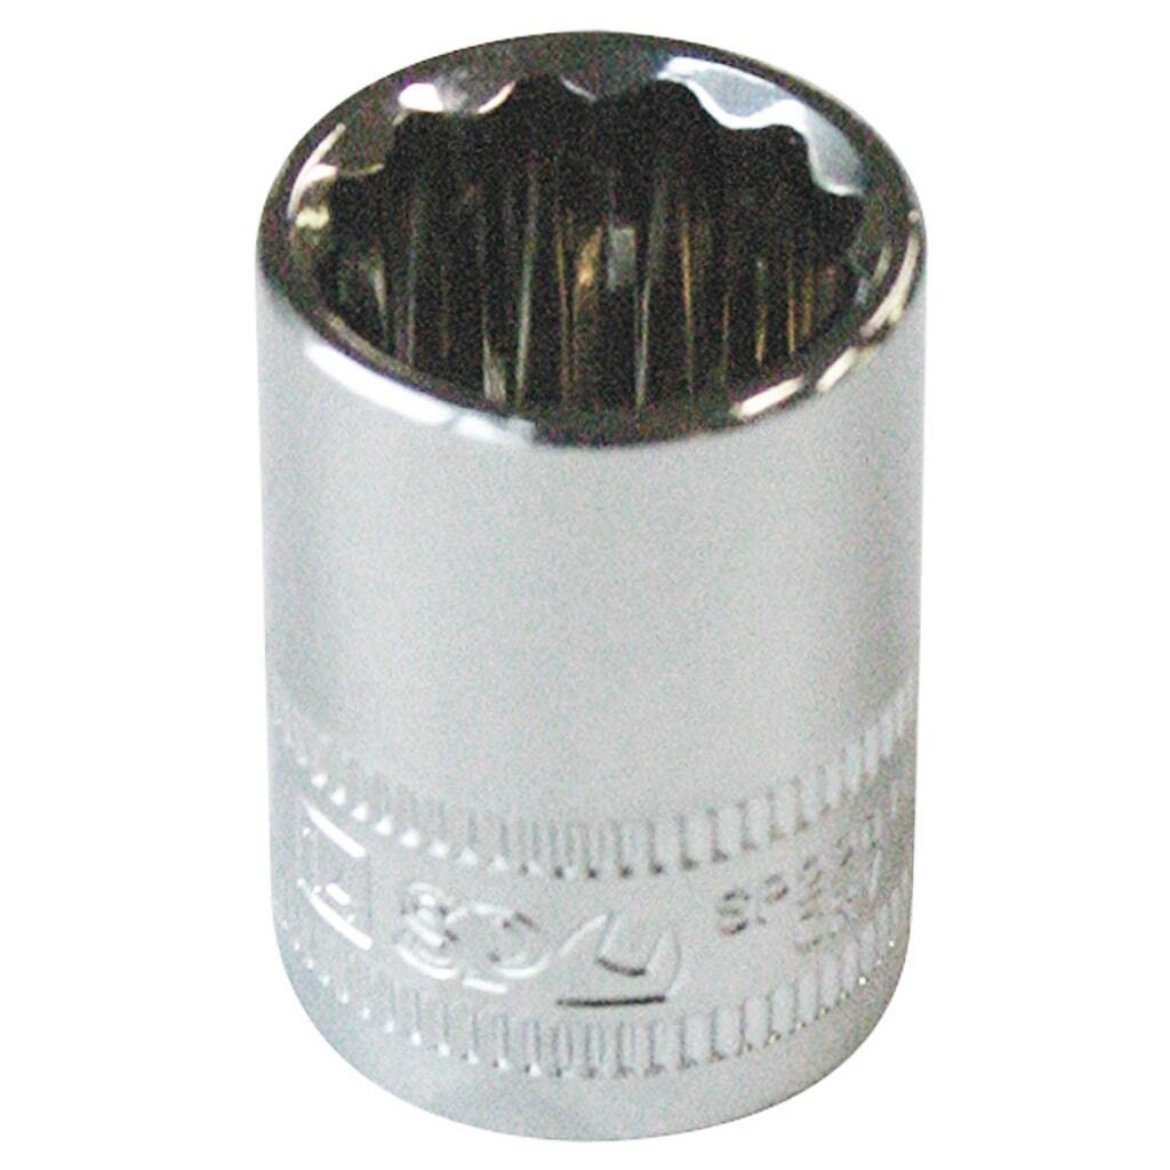 Picture of SOCKET 3/8DR 12PT SAE 3/8 SP TOOLS